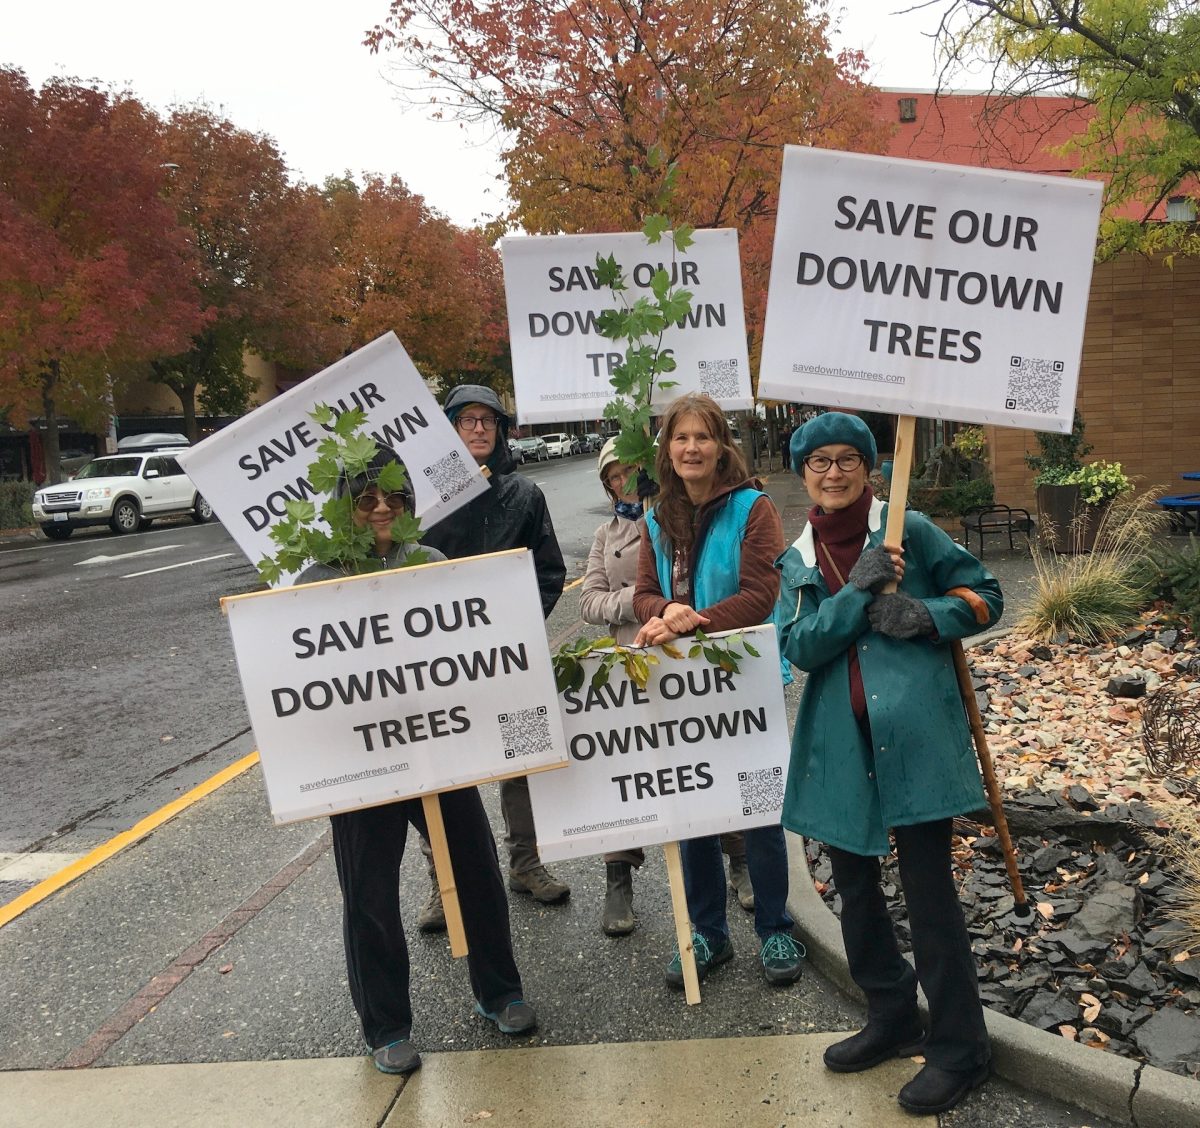 Save Downtown Trees sign waving on the corner by Ricos Pub last Saturday